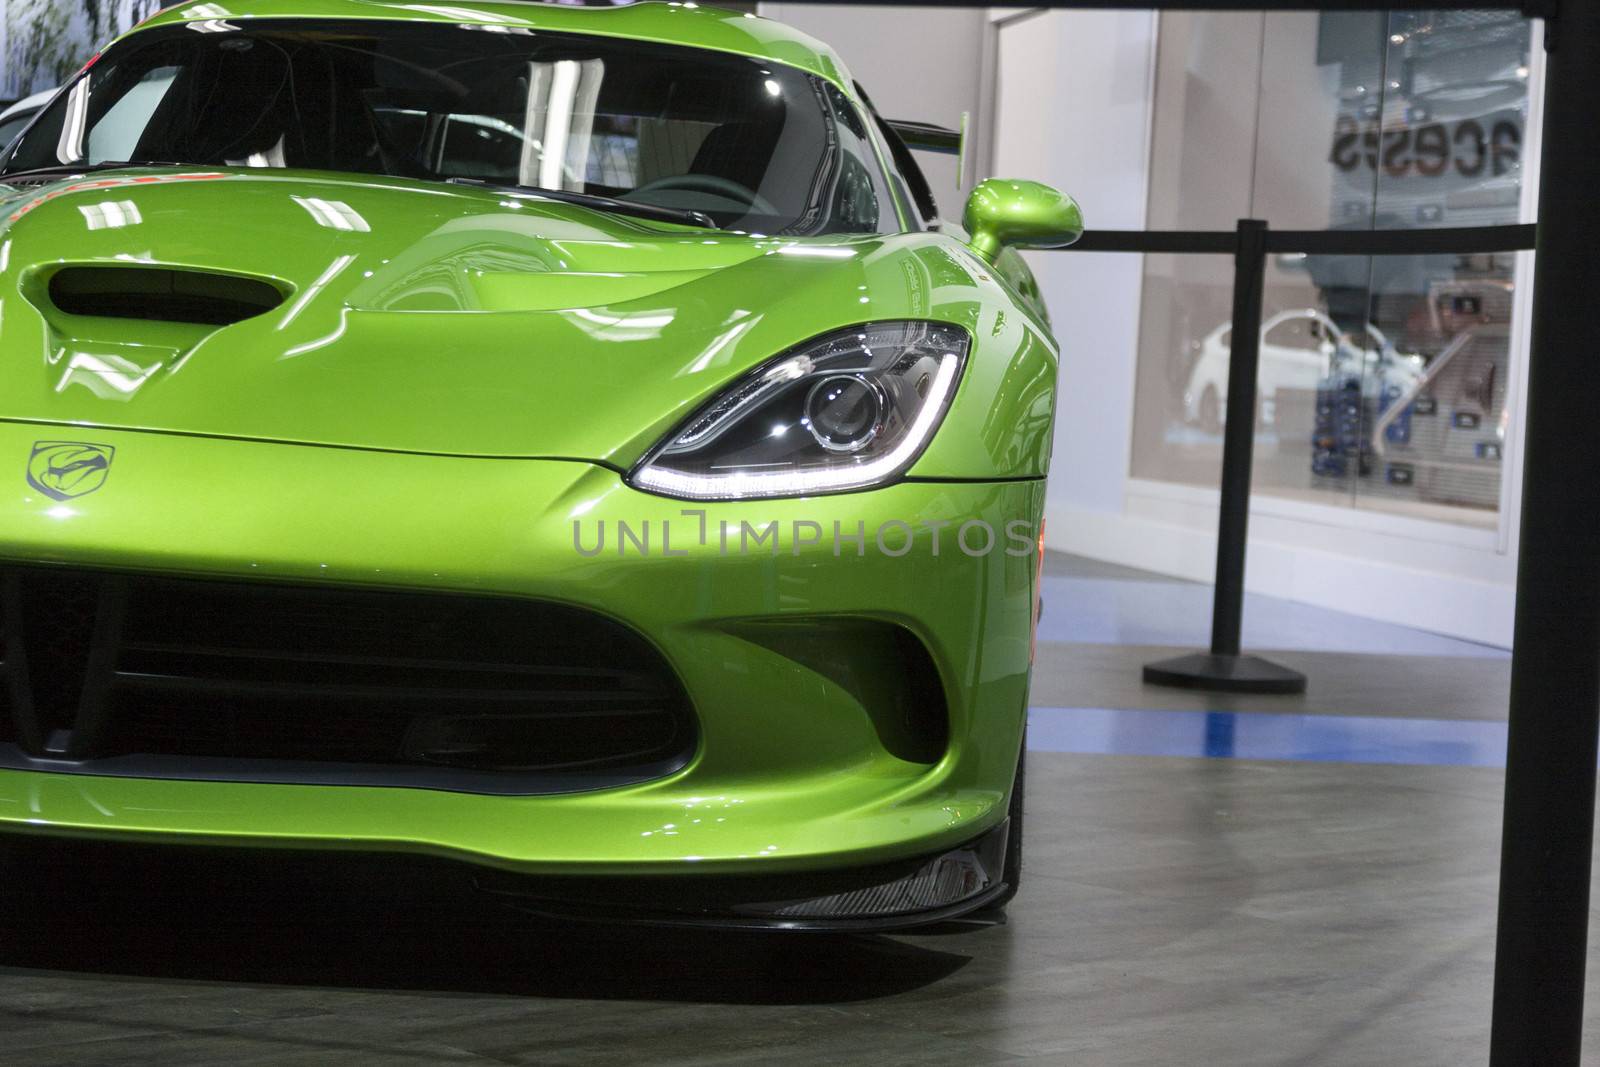 DETROIT - JANUARY 26 :The 2014 Dodge SRT Viper at The North Amer by snokid